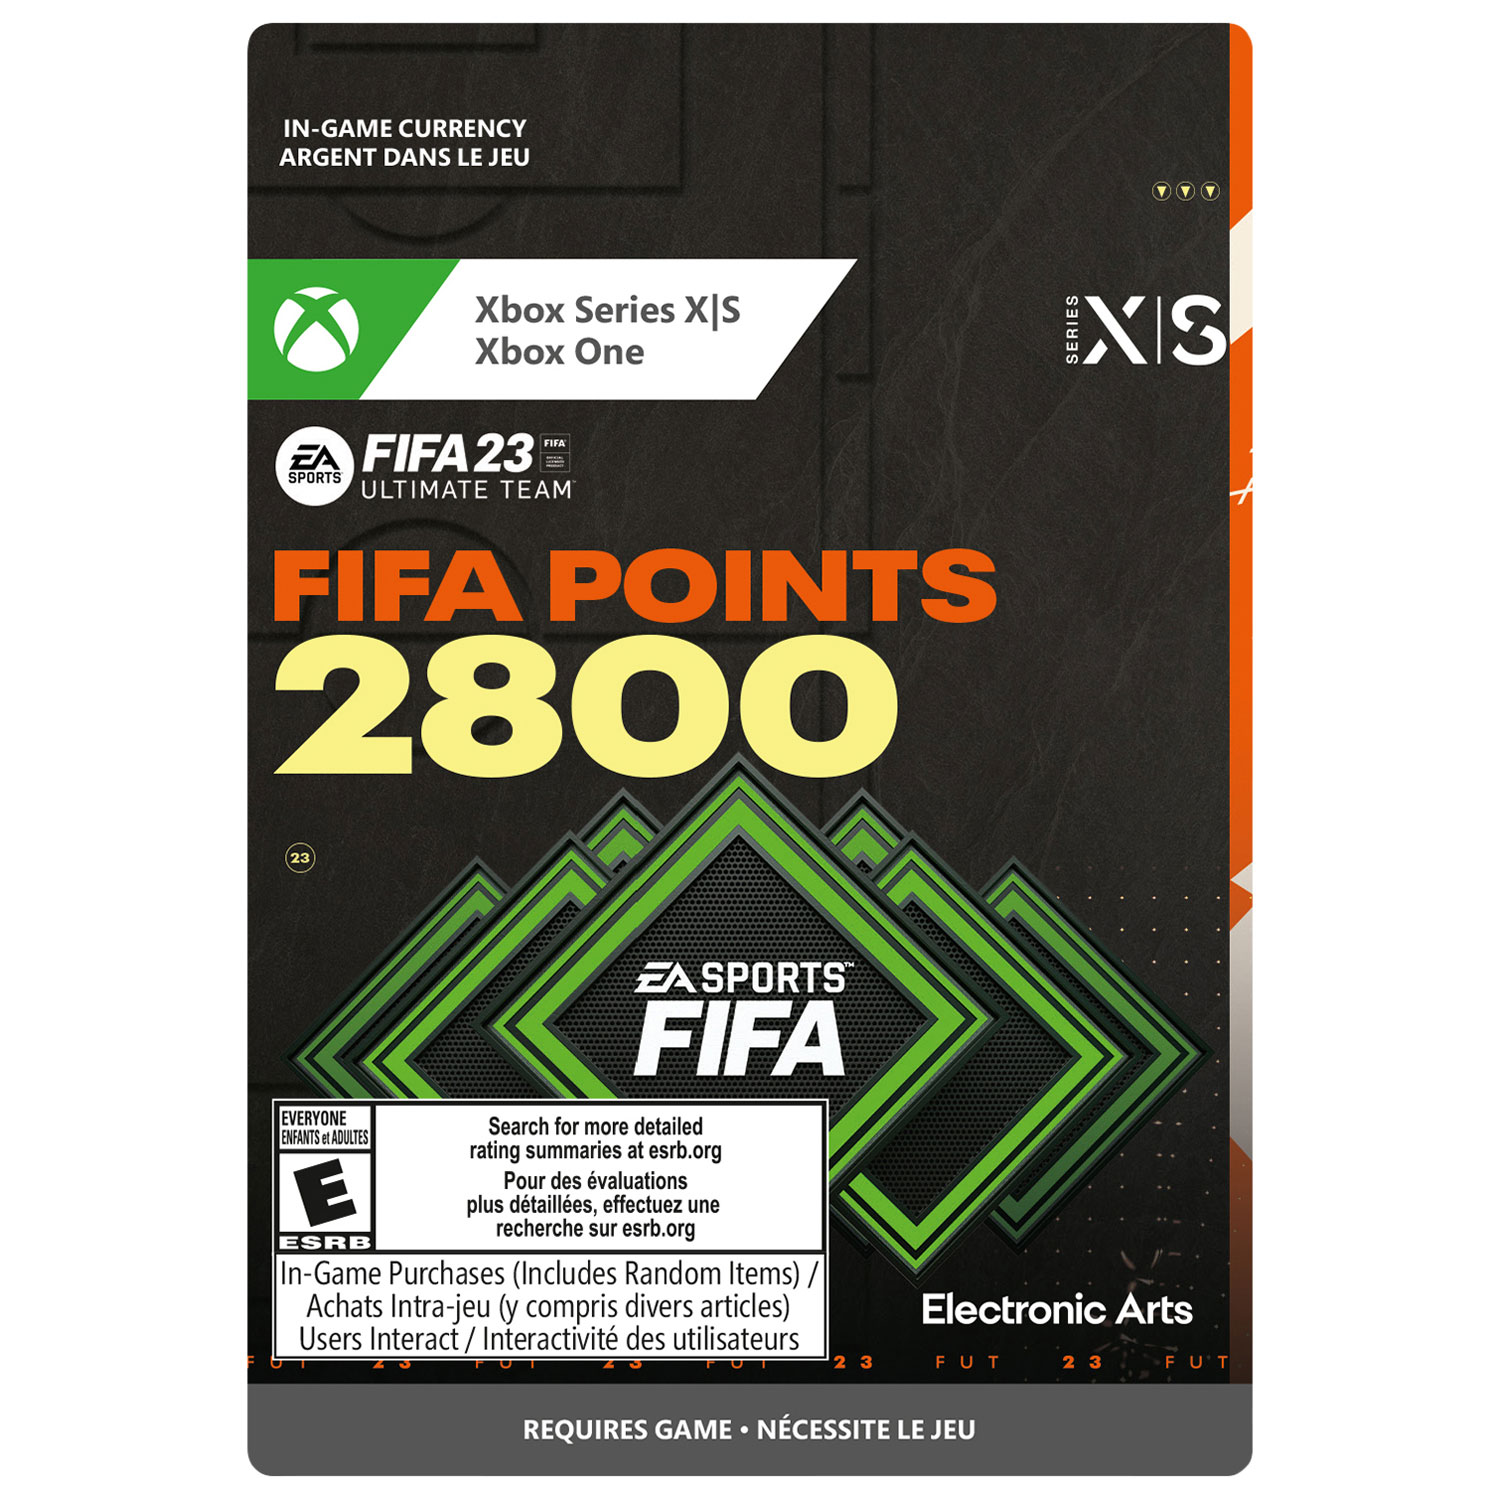 FIFA 23: 2,800 Points (Xbox Series X|S / Xbox One) - Digital Download